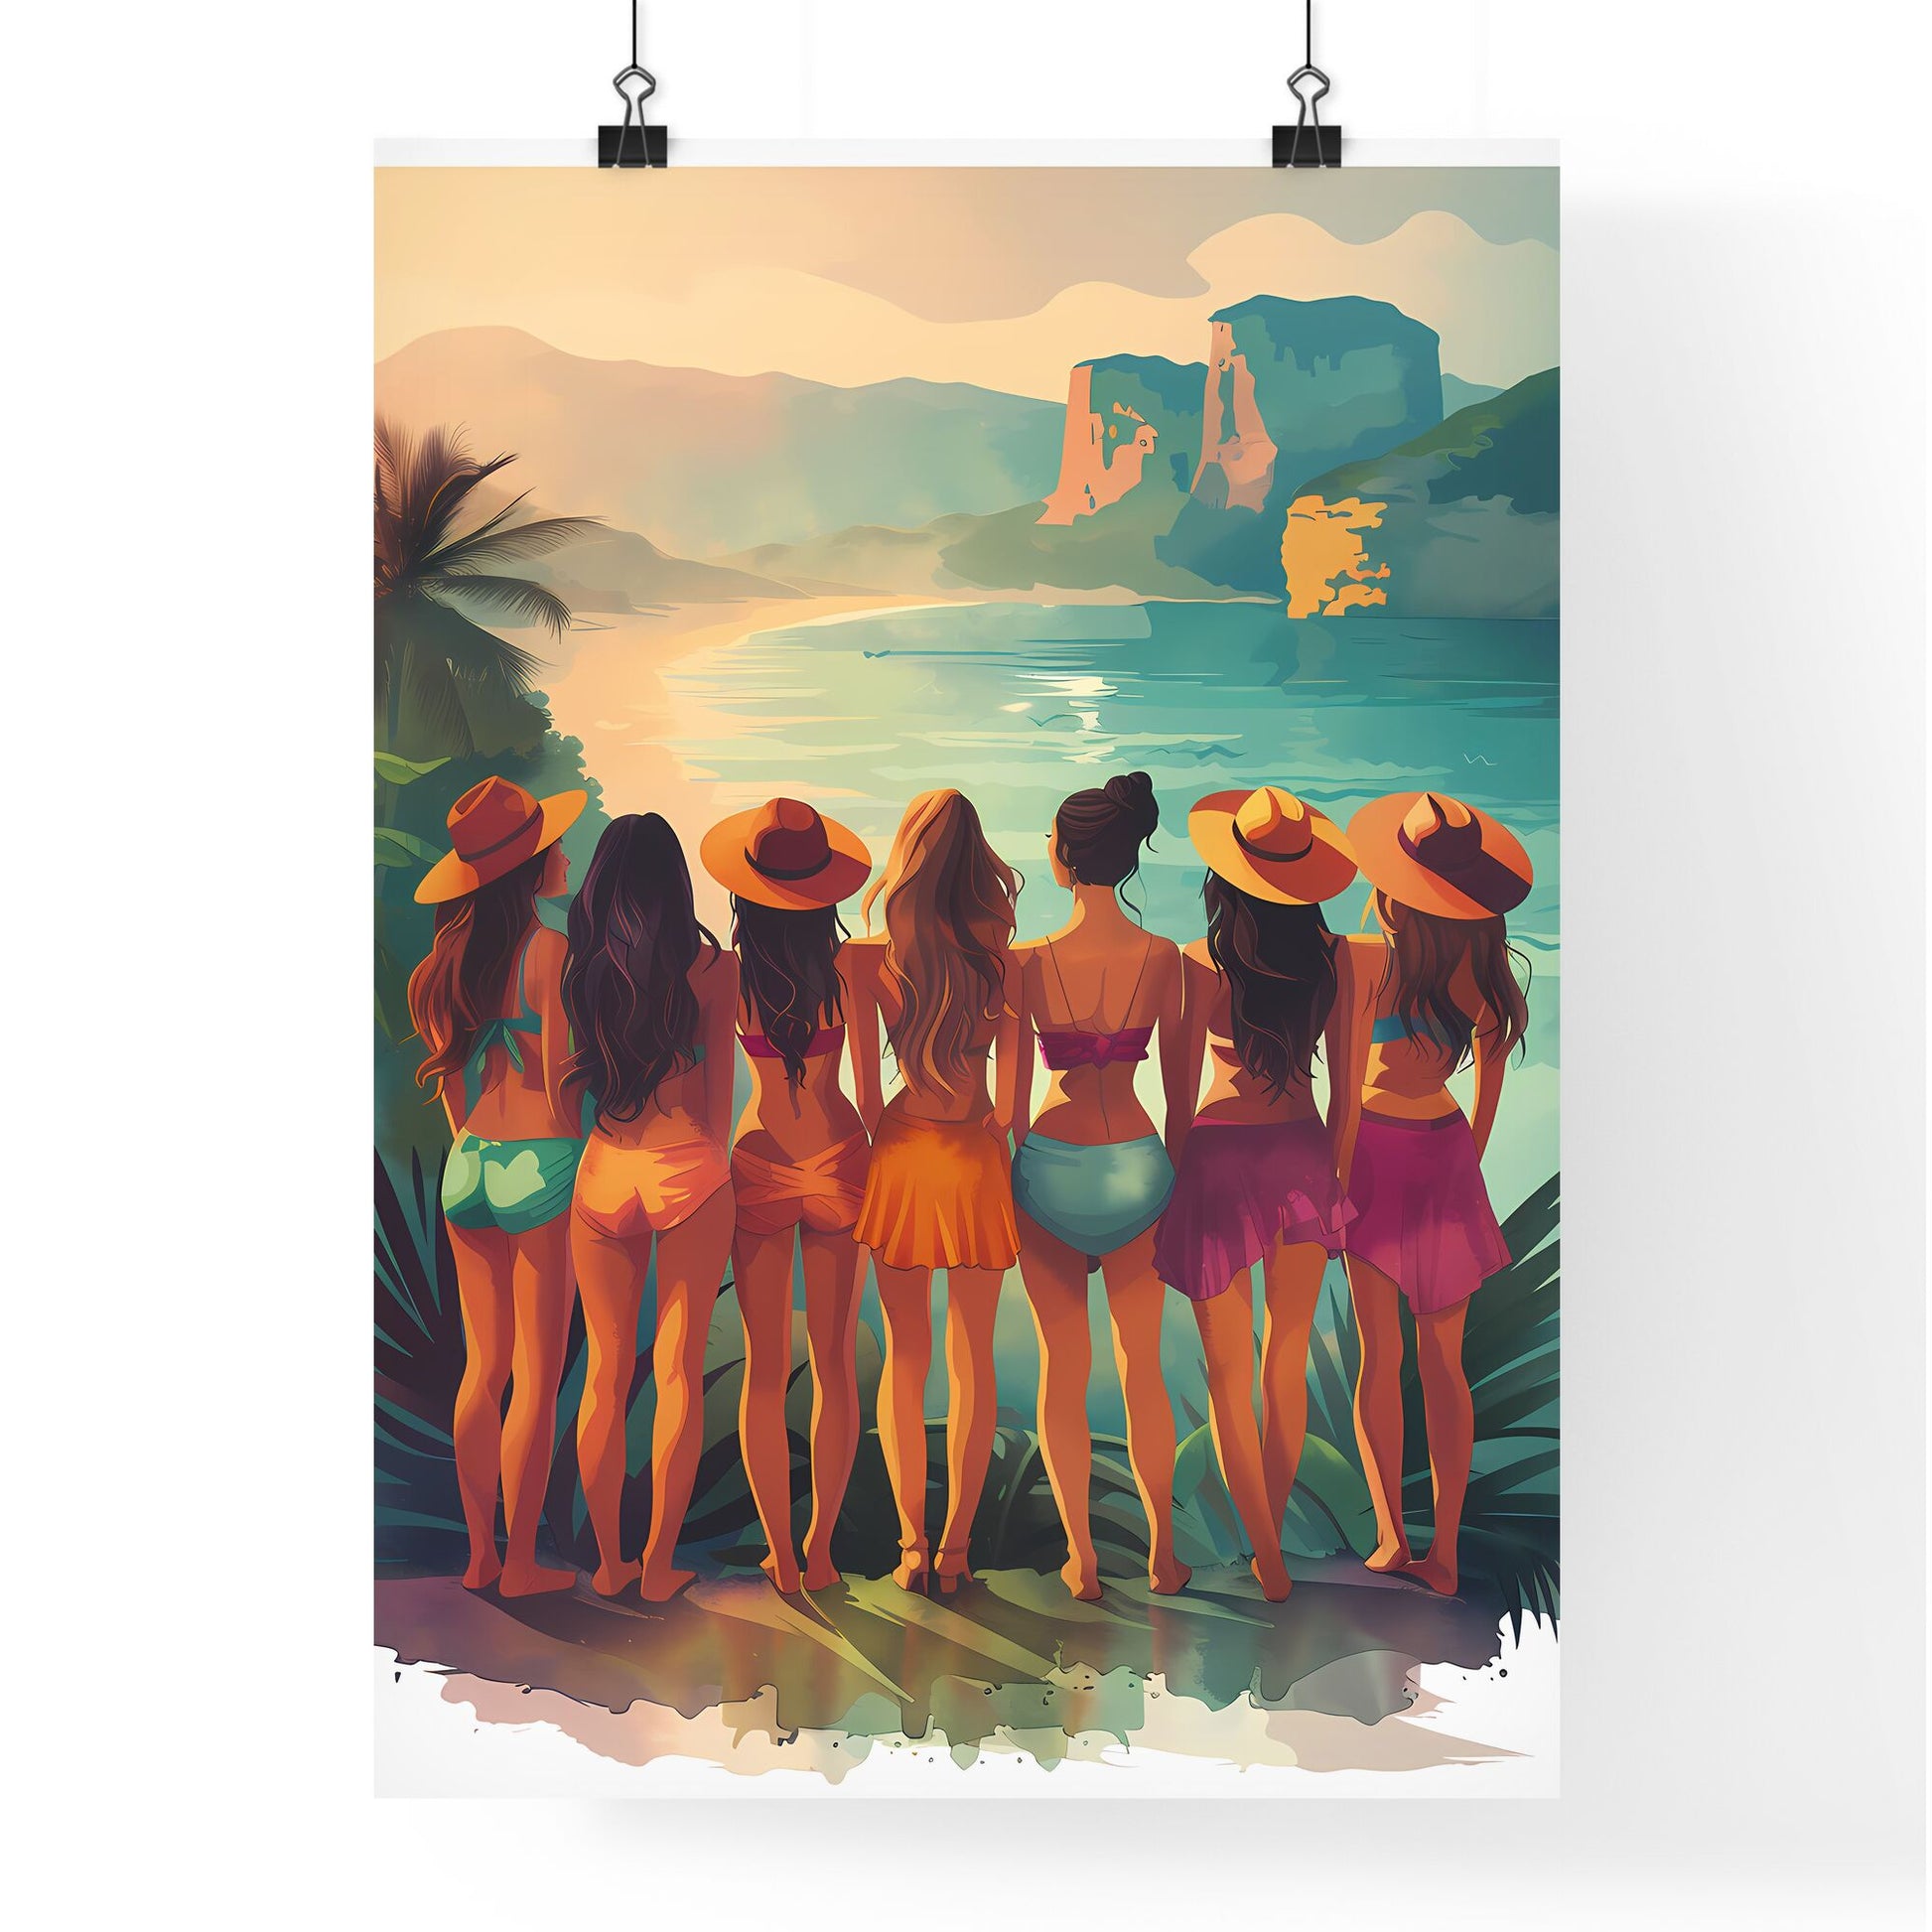 Multiethnic Bachelorette Party at Beach: Beautiful Young Women in Sundresses, Celebrating, with Long Hair, Hats | Vibrant Art Clipart on White Default Title